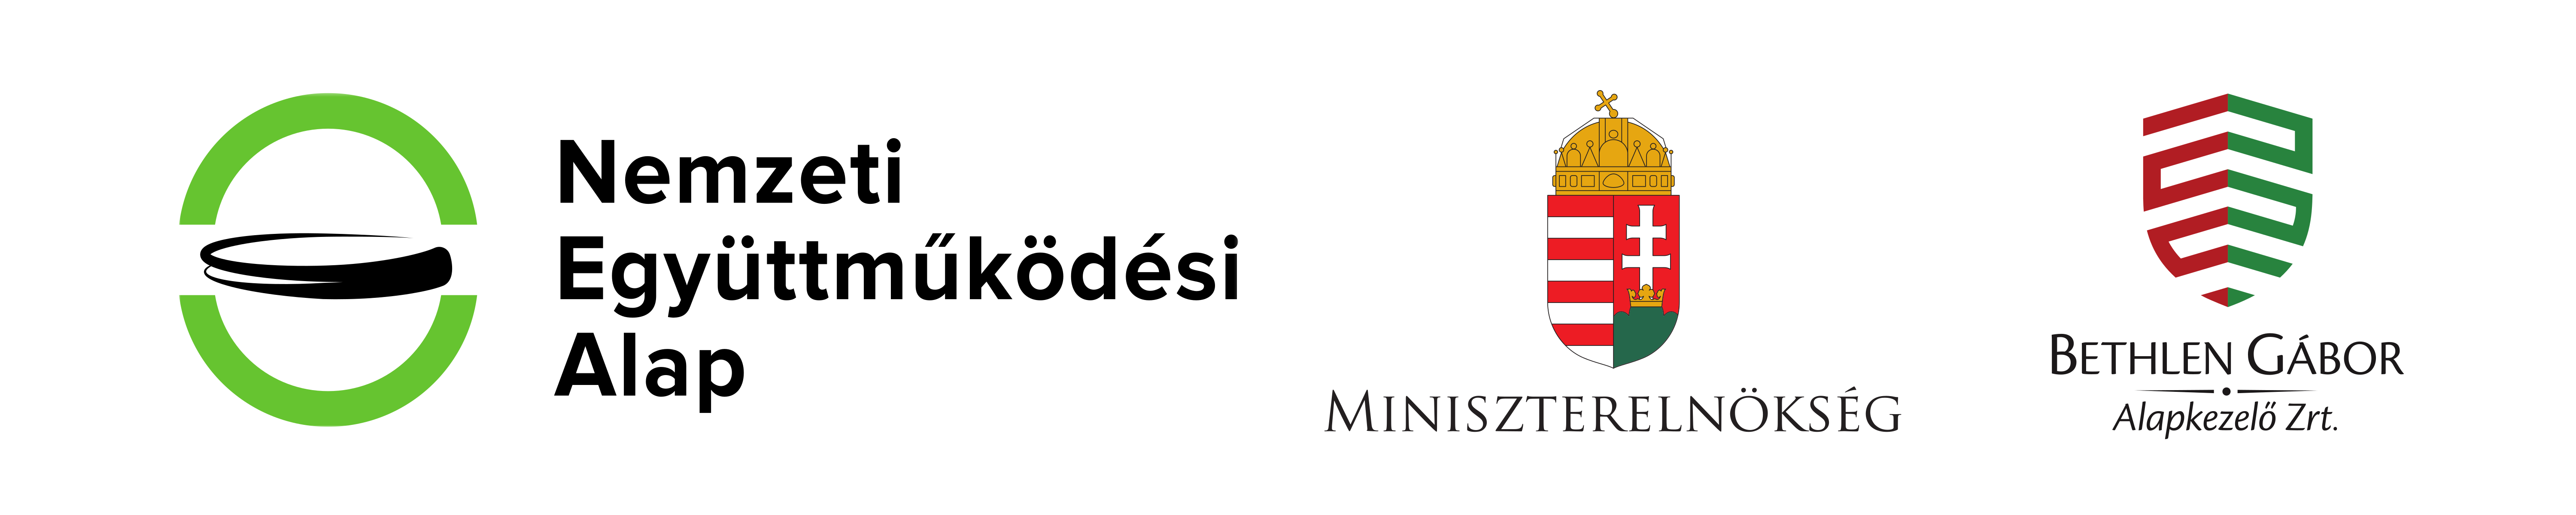 Logo of the National Cooperation Fund, Prime Minister's Office and Bethlen Gábor Fund Management Ltd.